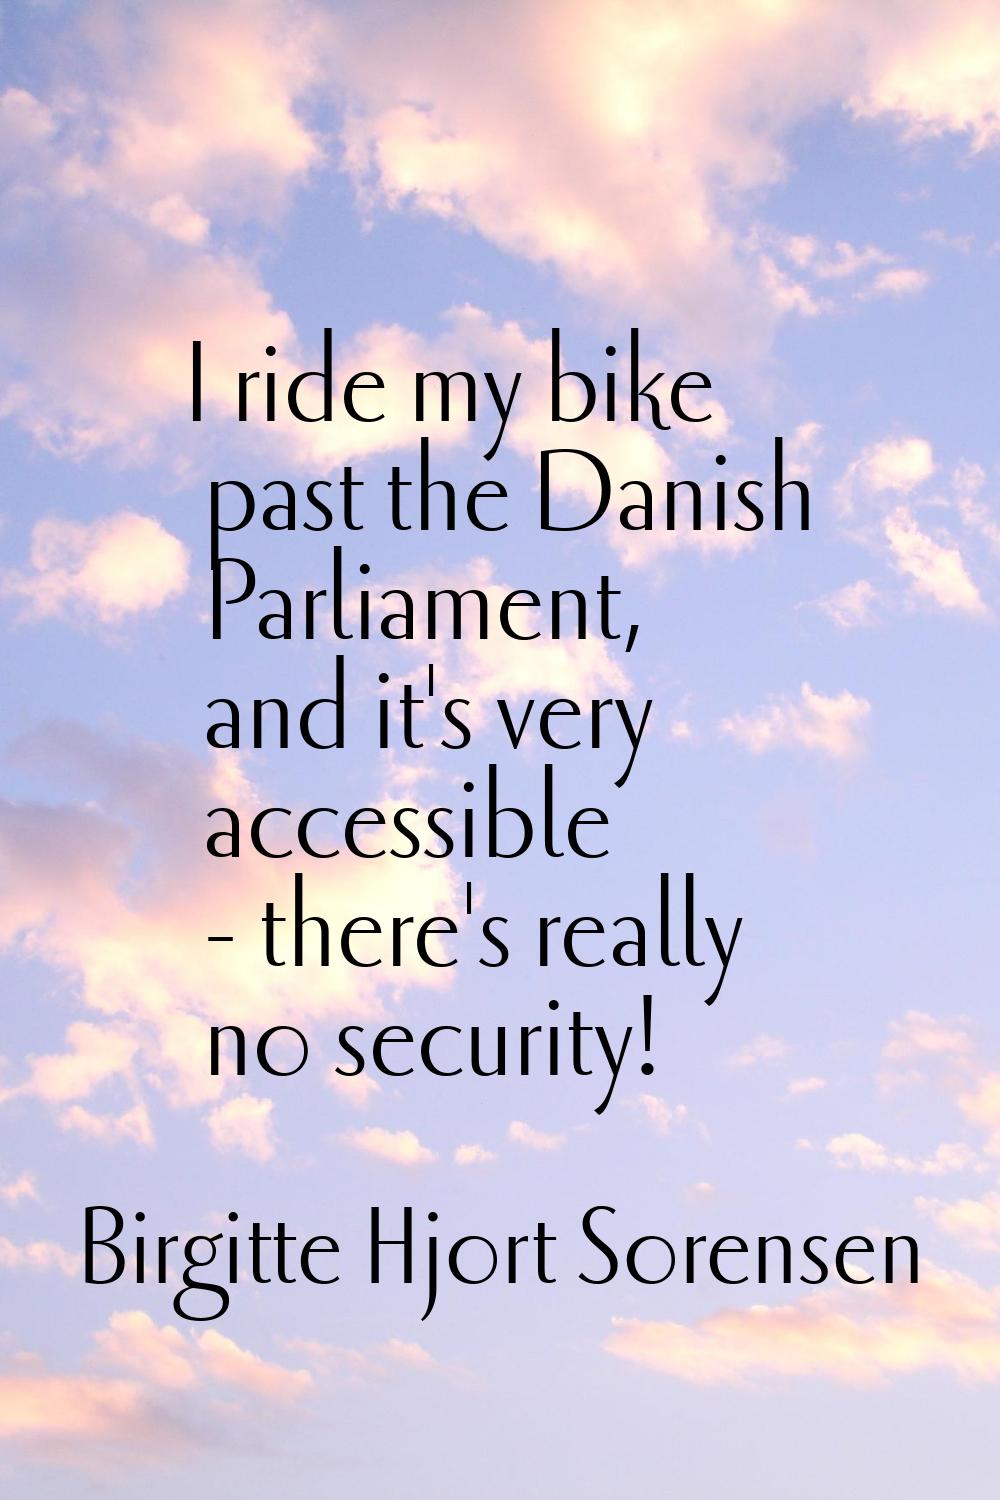 I ride my bike past the Danish Parliament, and it's very accessible - there's really no security!